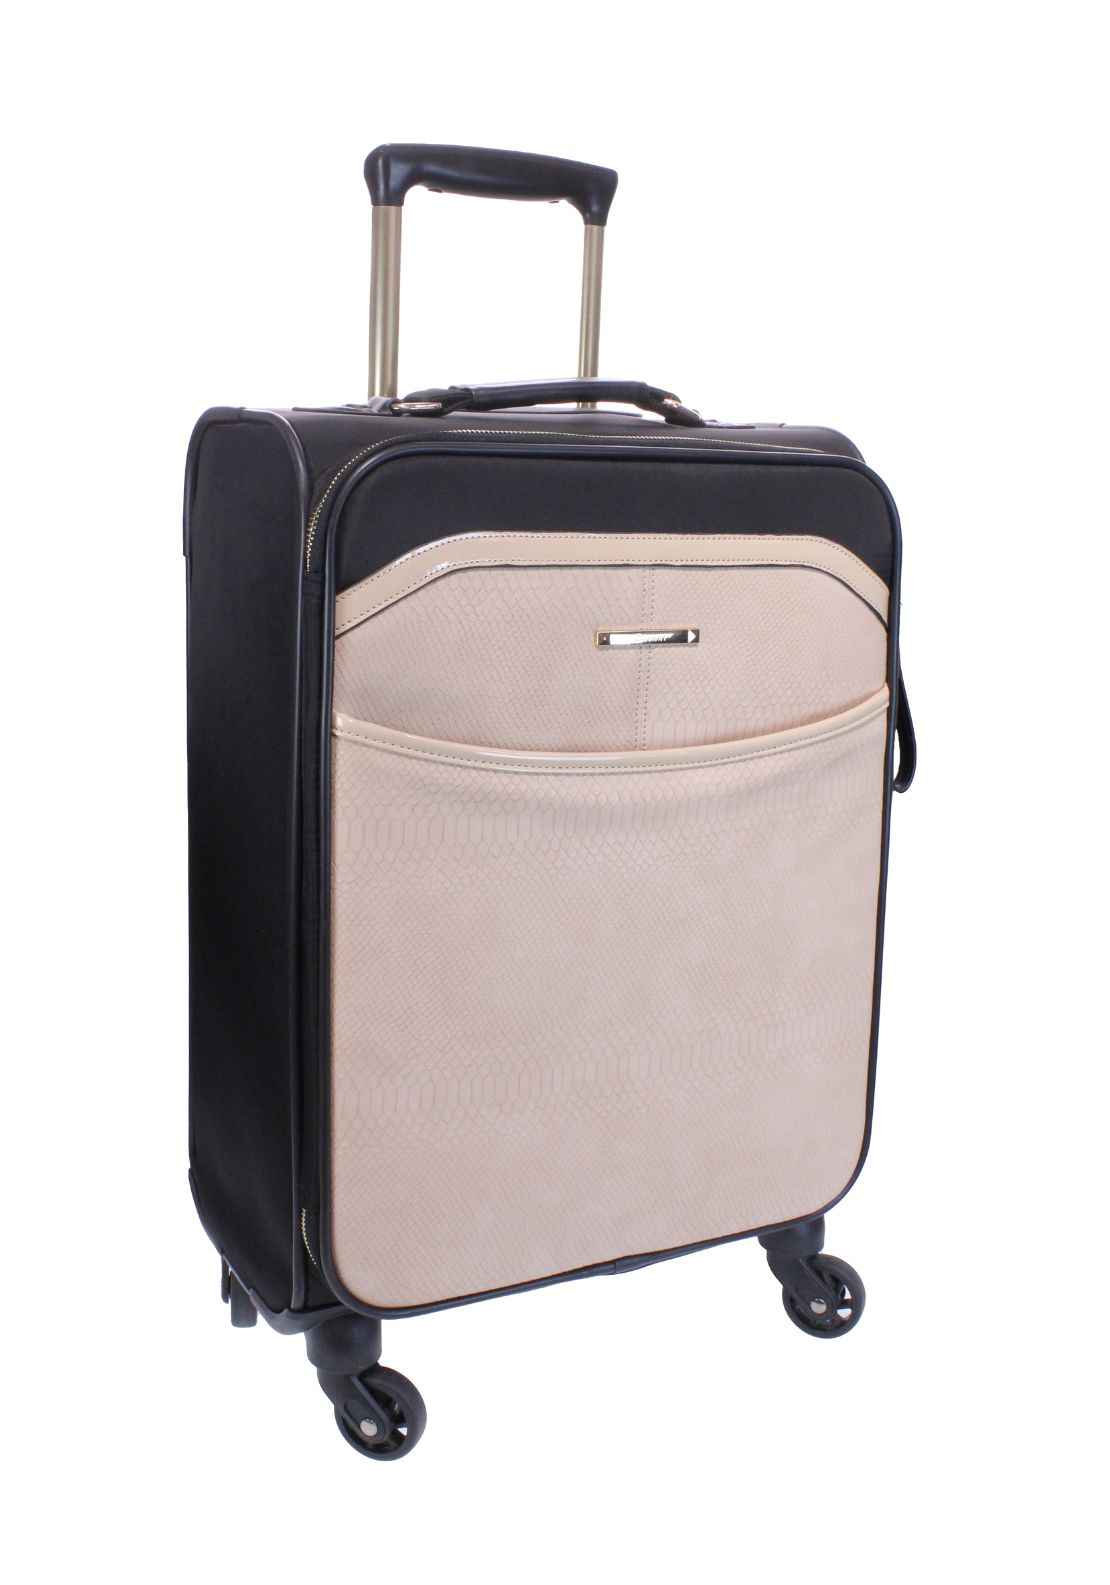 Gionni Fashion Luggage Cabin Case - Nude 1 Shaws Department Stores